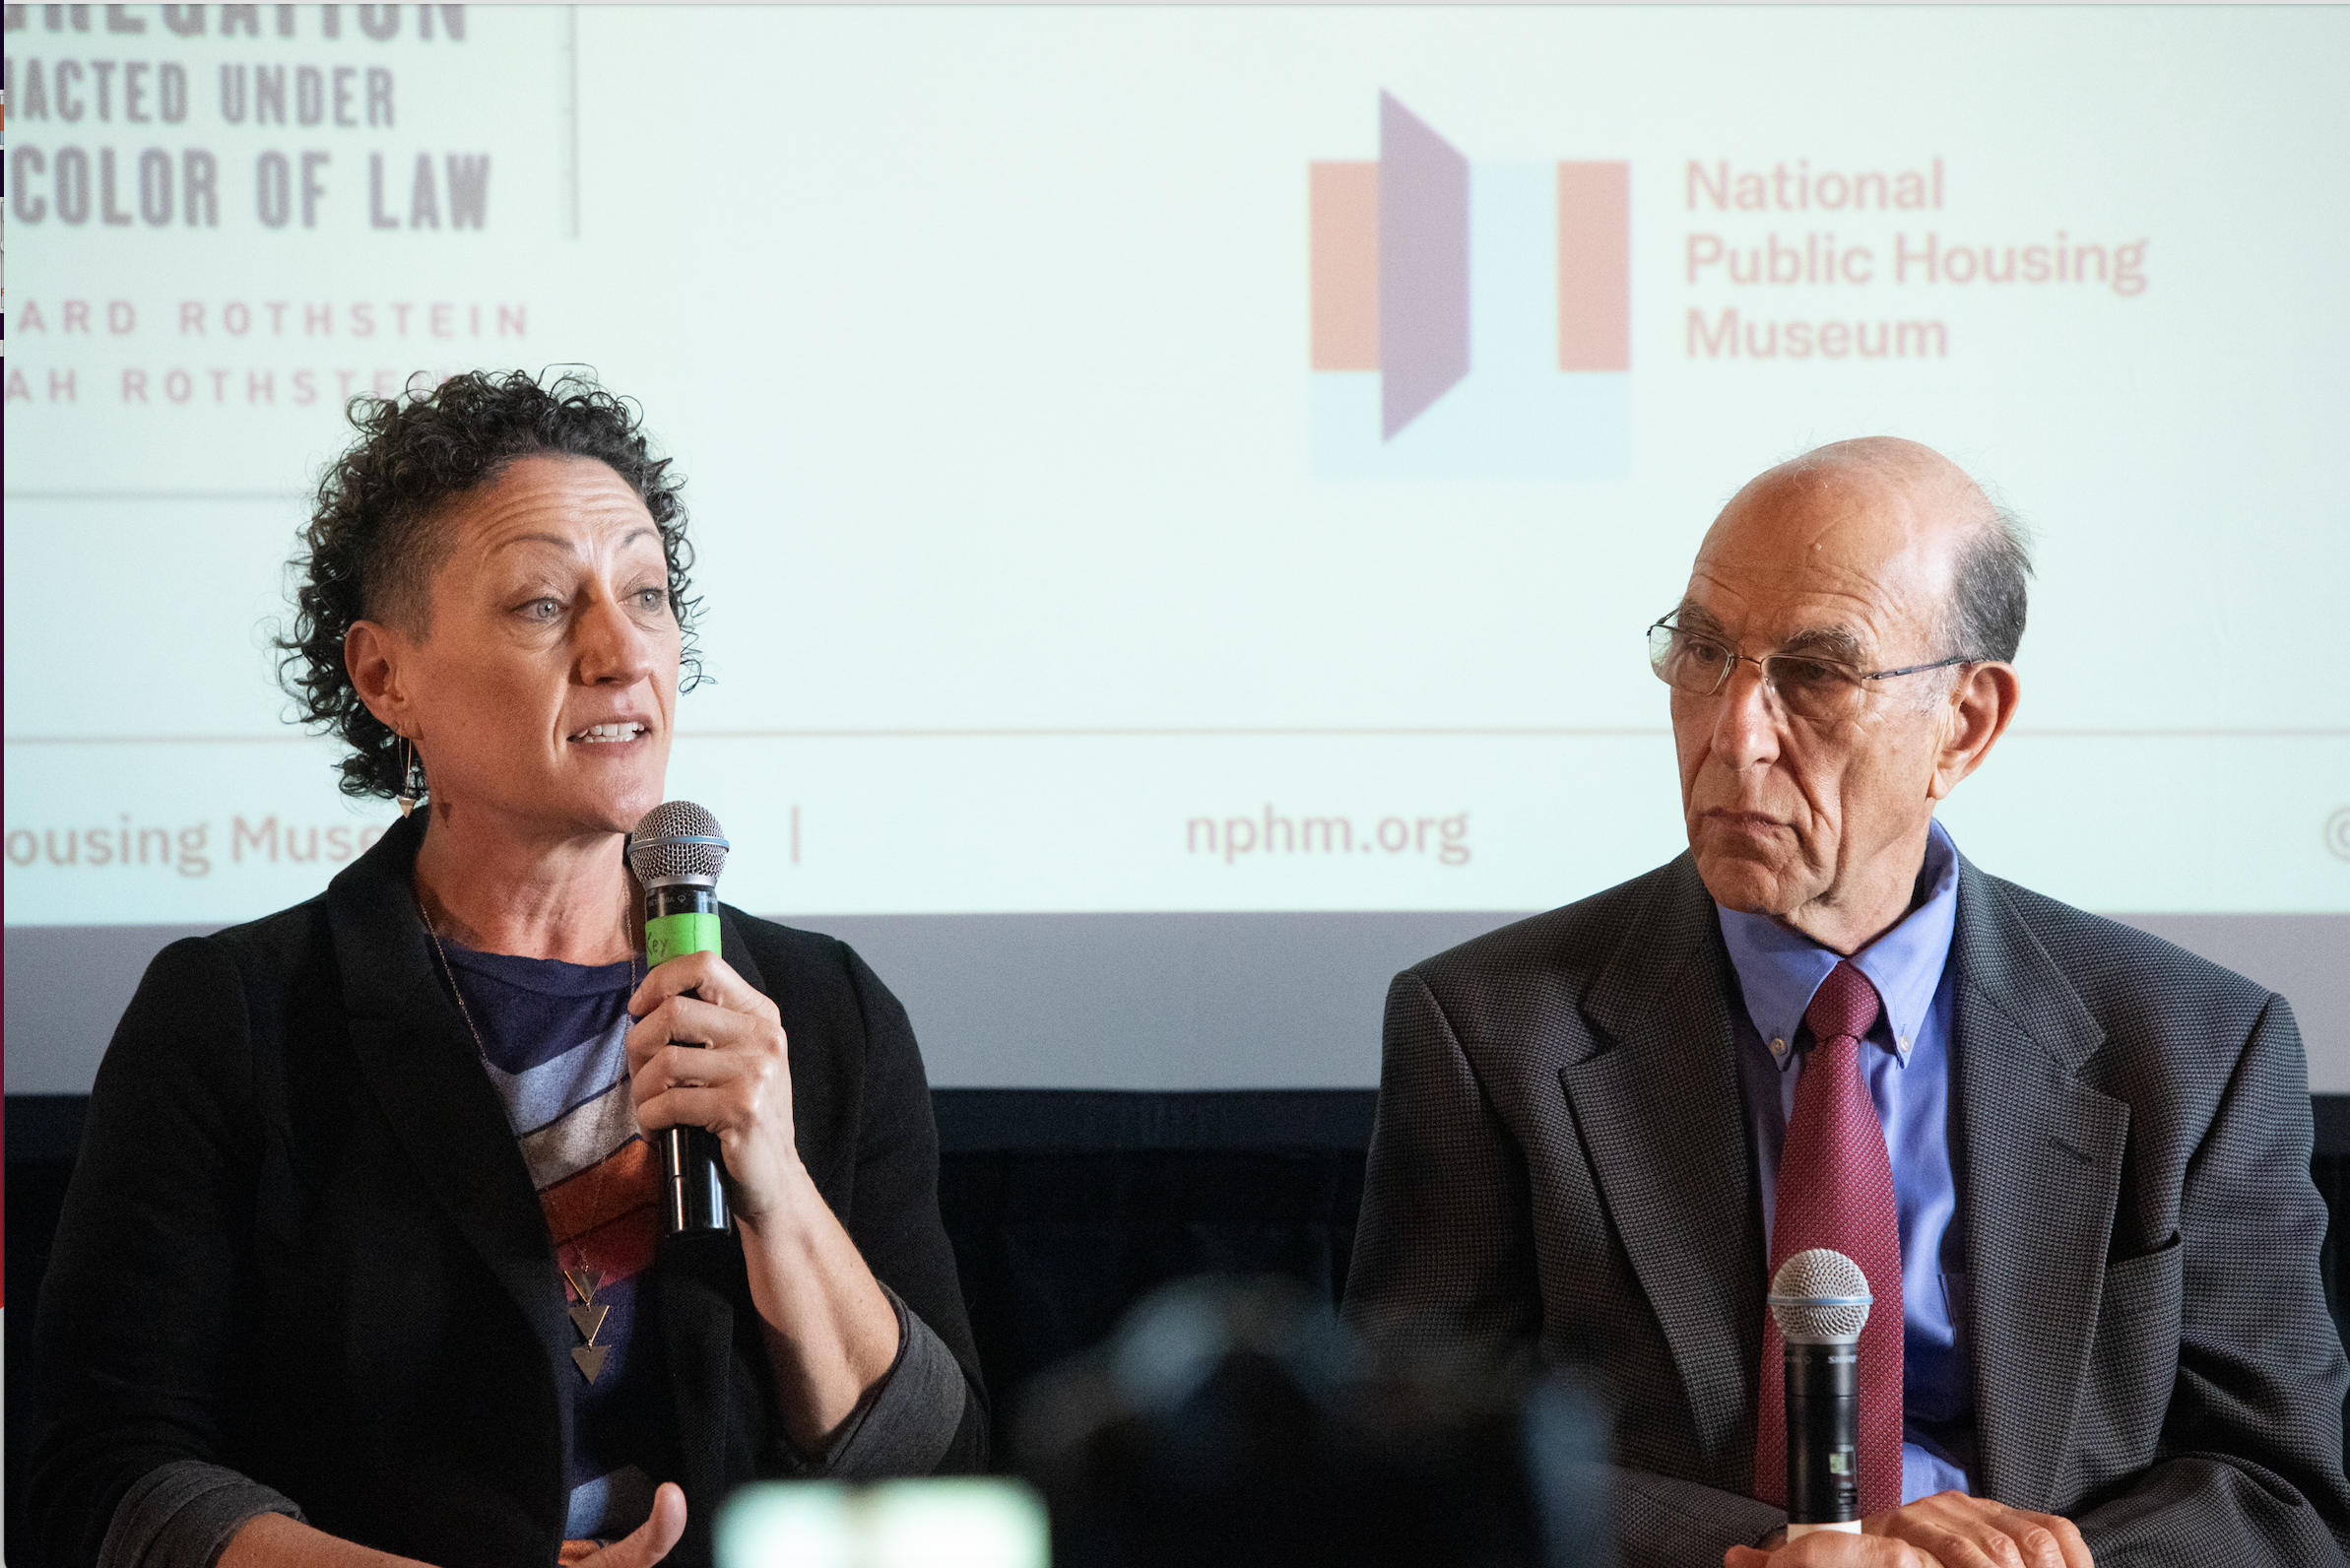  Leah Rothstein speaks into a microphone while sitting in front of a screen with the National Public Housing Museum’s logo on it. Richard Rothstein sits next to her. 